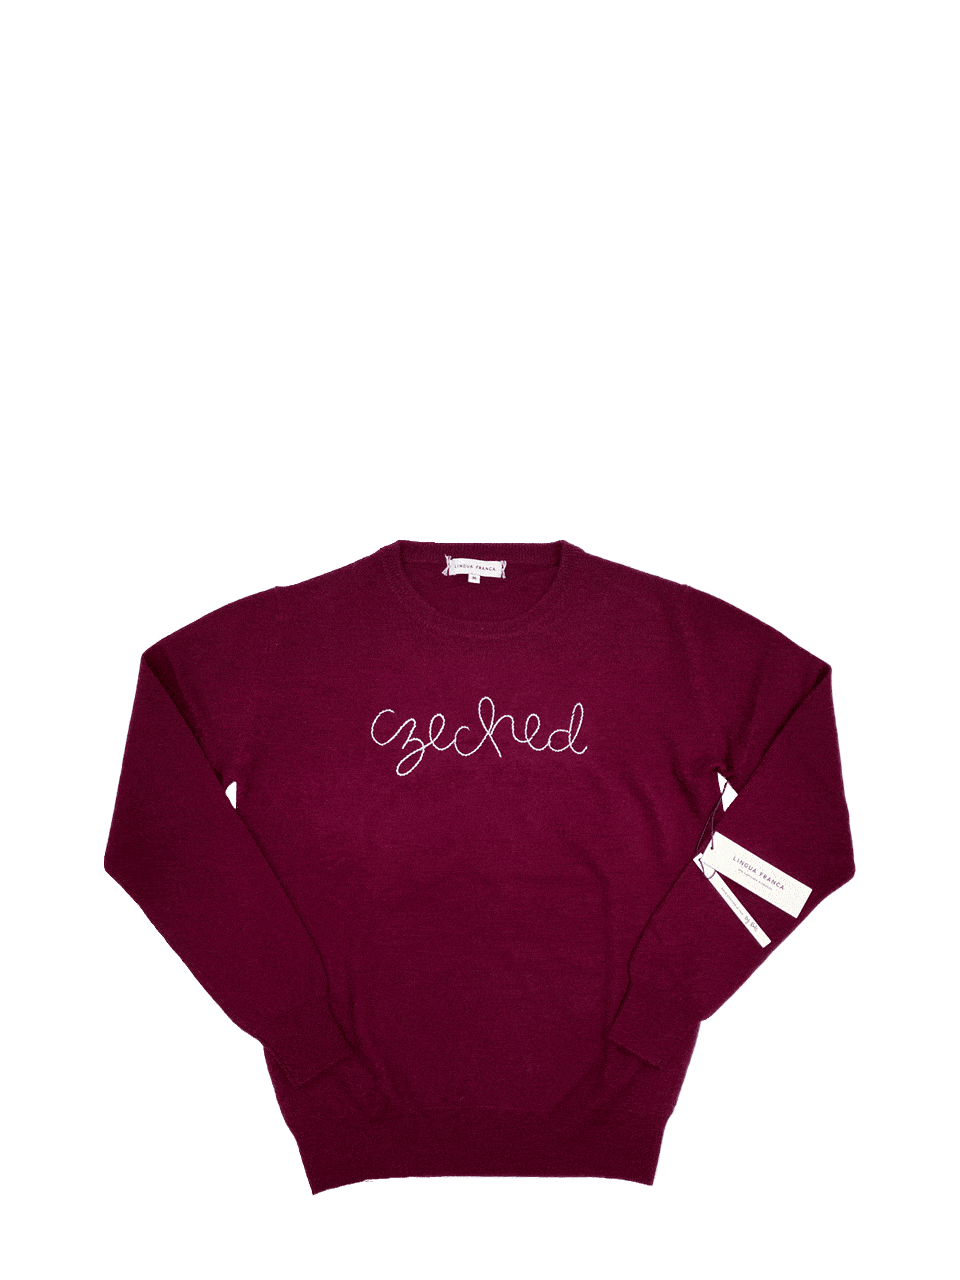 Women's Czeched Cashmere Sweater LIFESTYLE Lingua Franca 